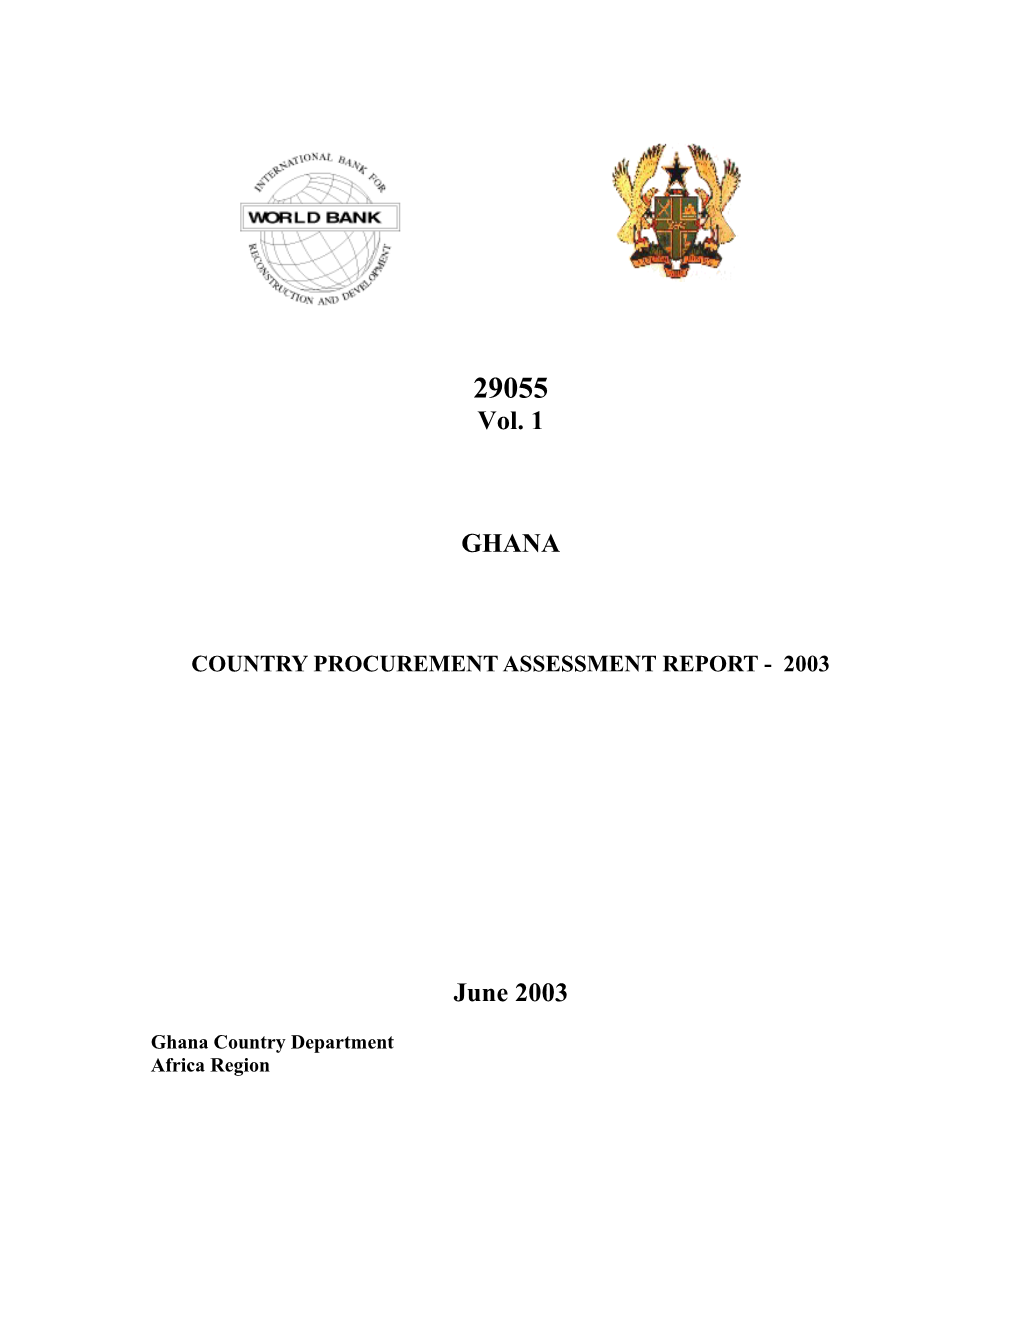 Country Procurement Assessment Report - 2003